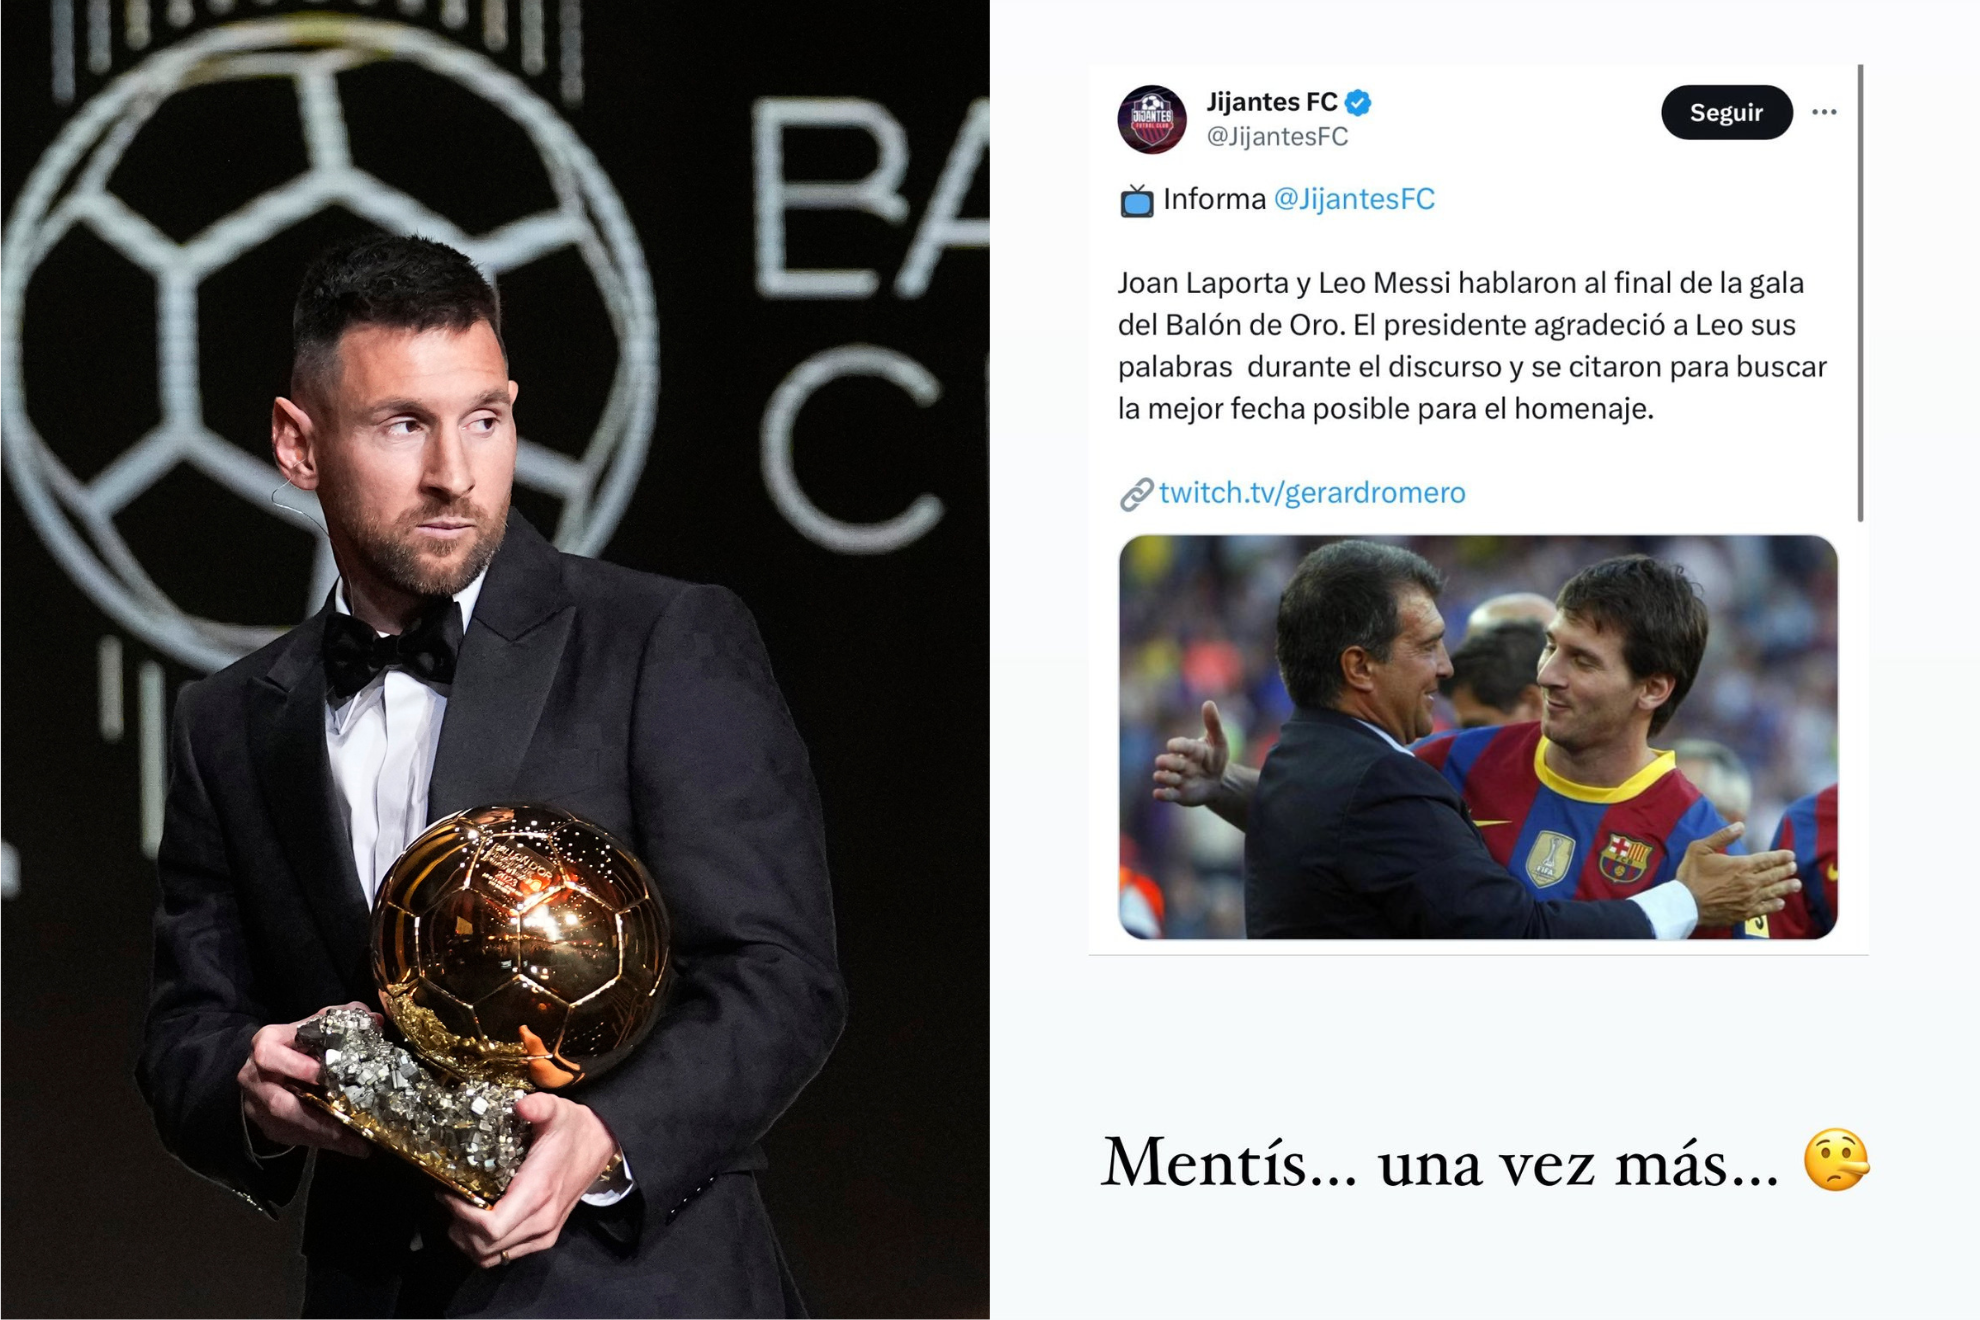 Lionel Messi is ruthless on and off the pitch.